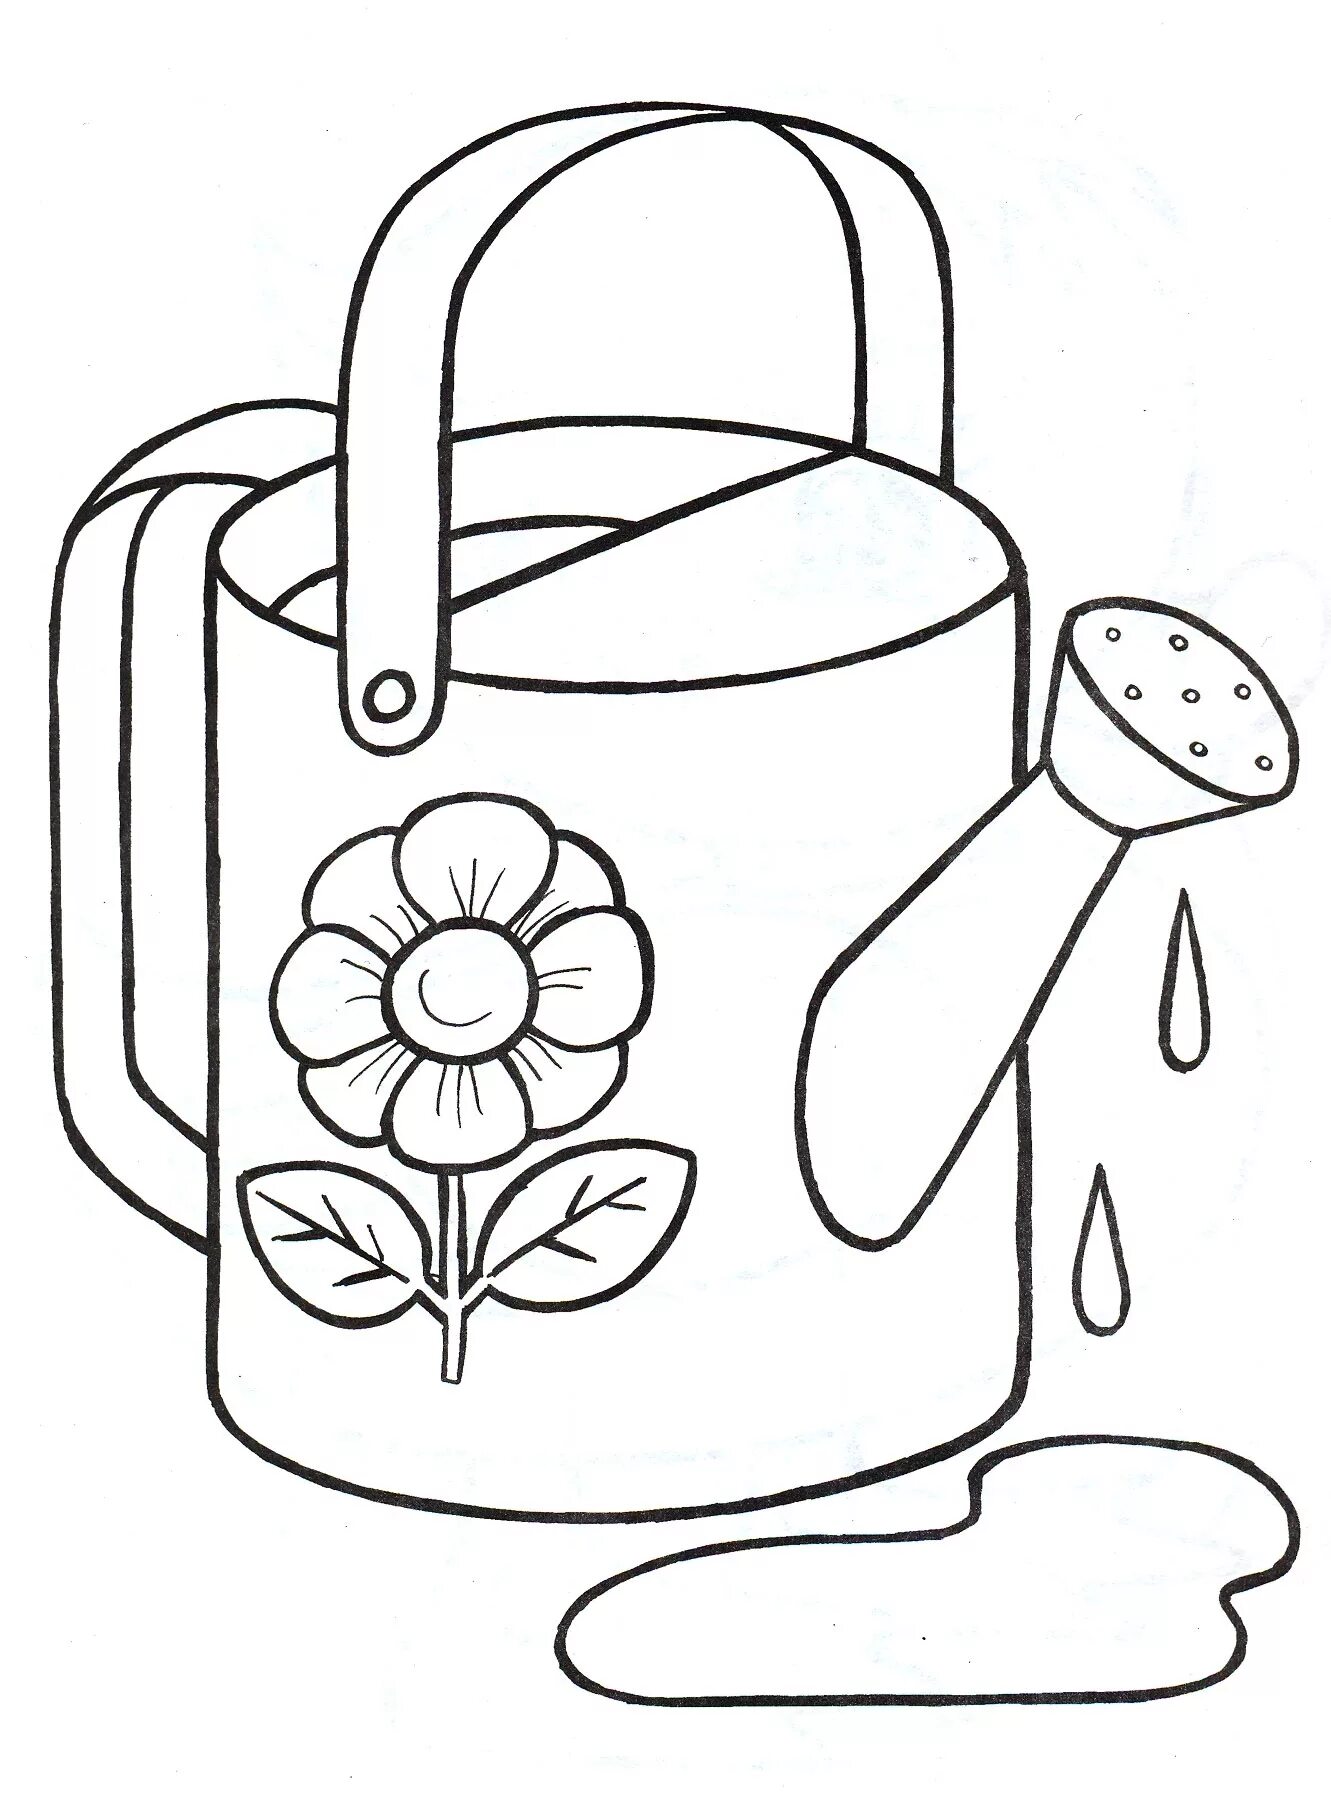 Playful watering can for kids